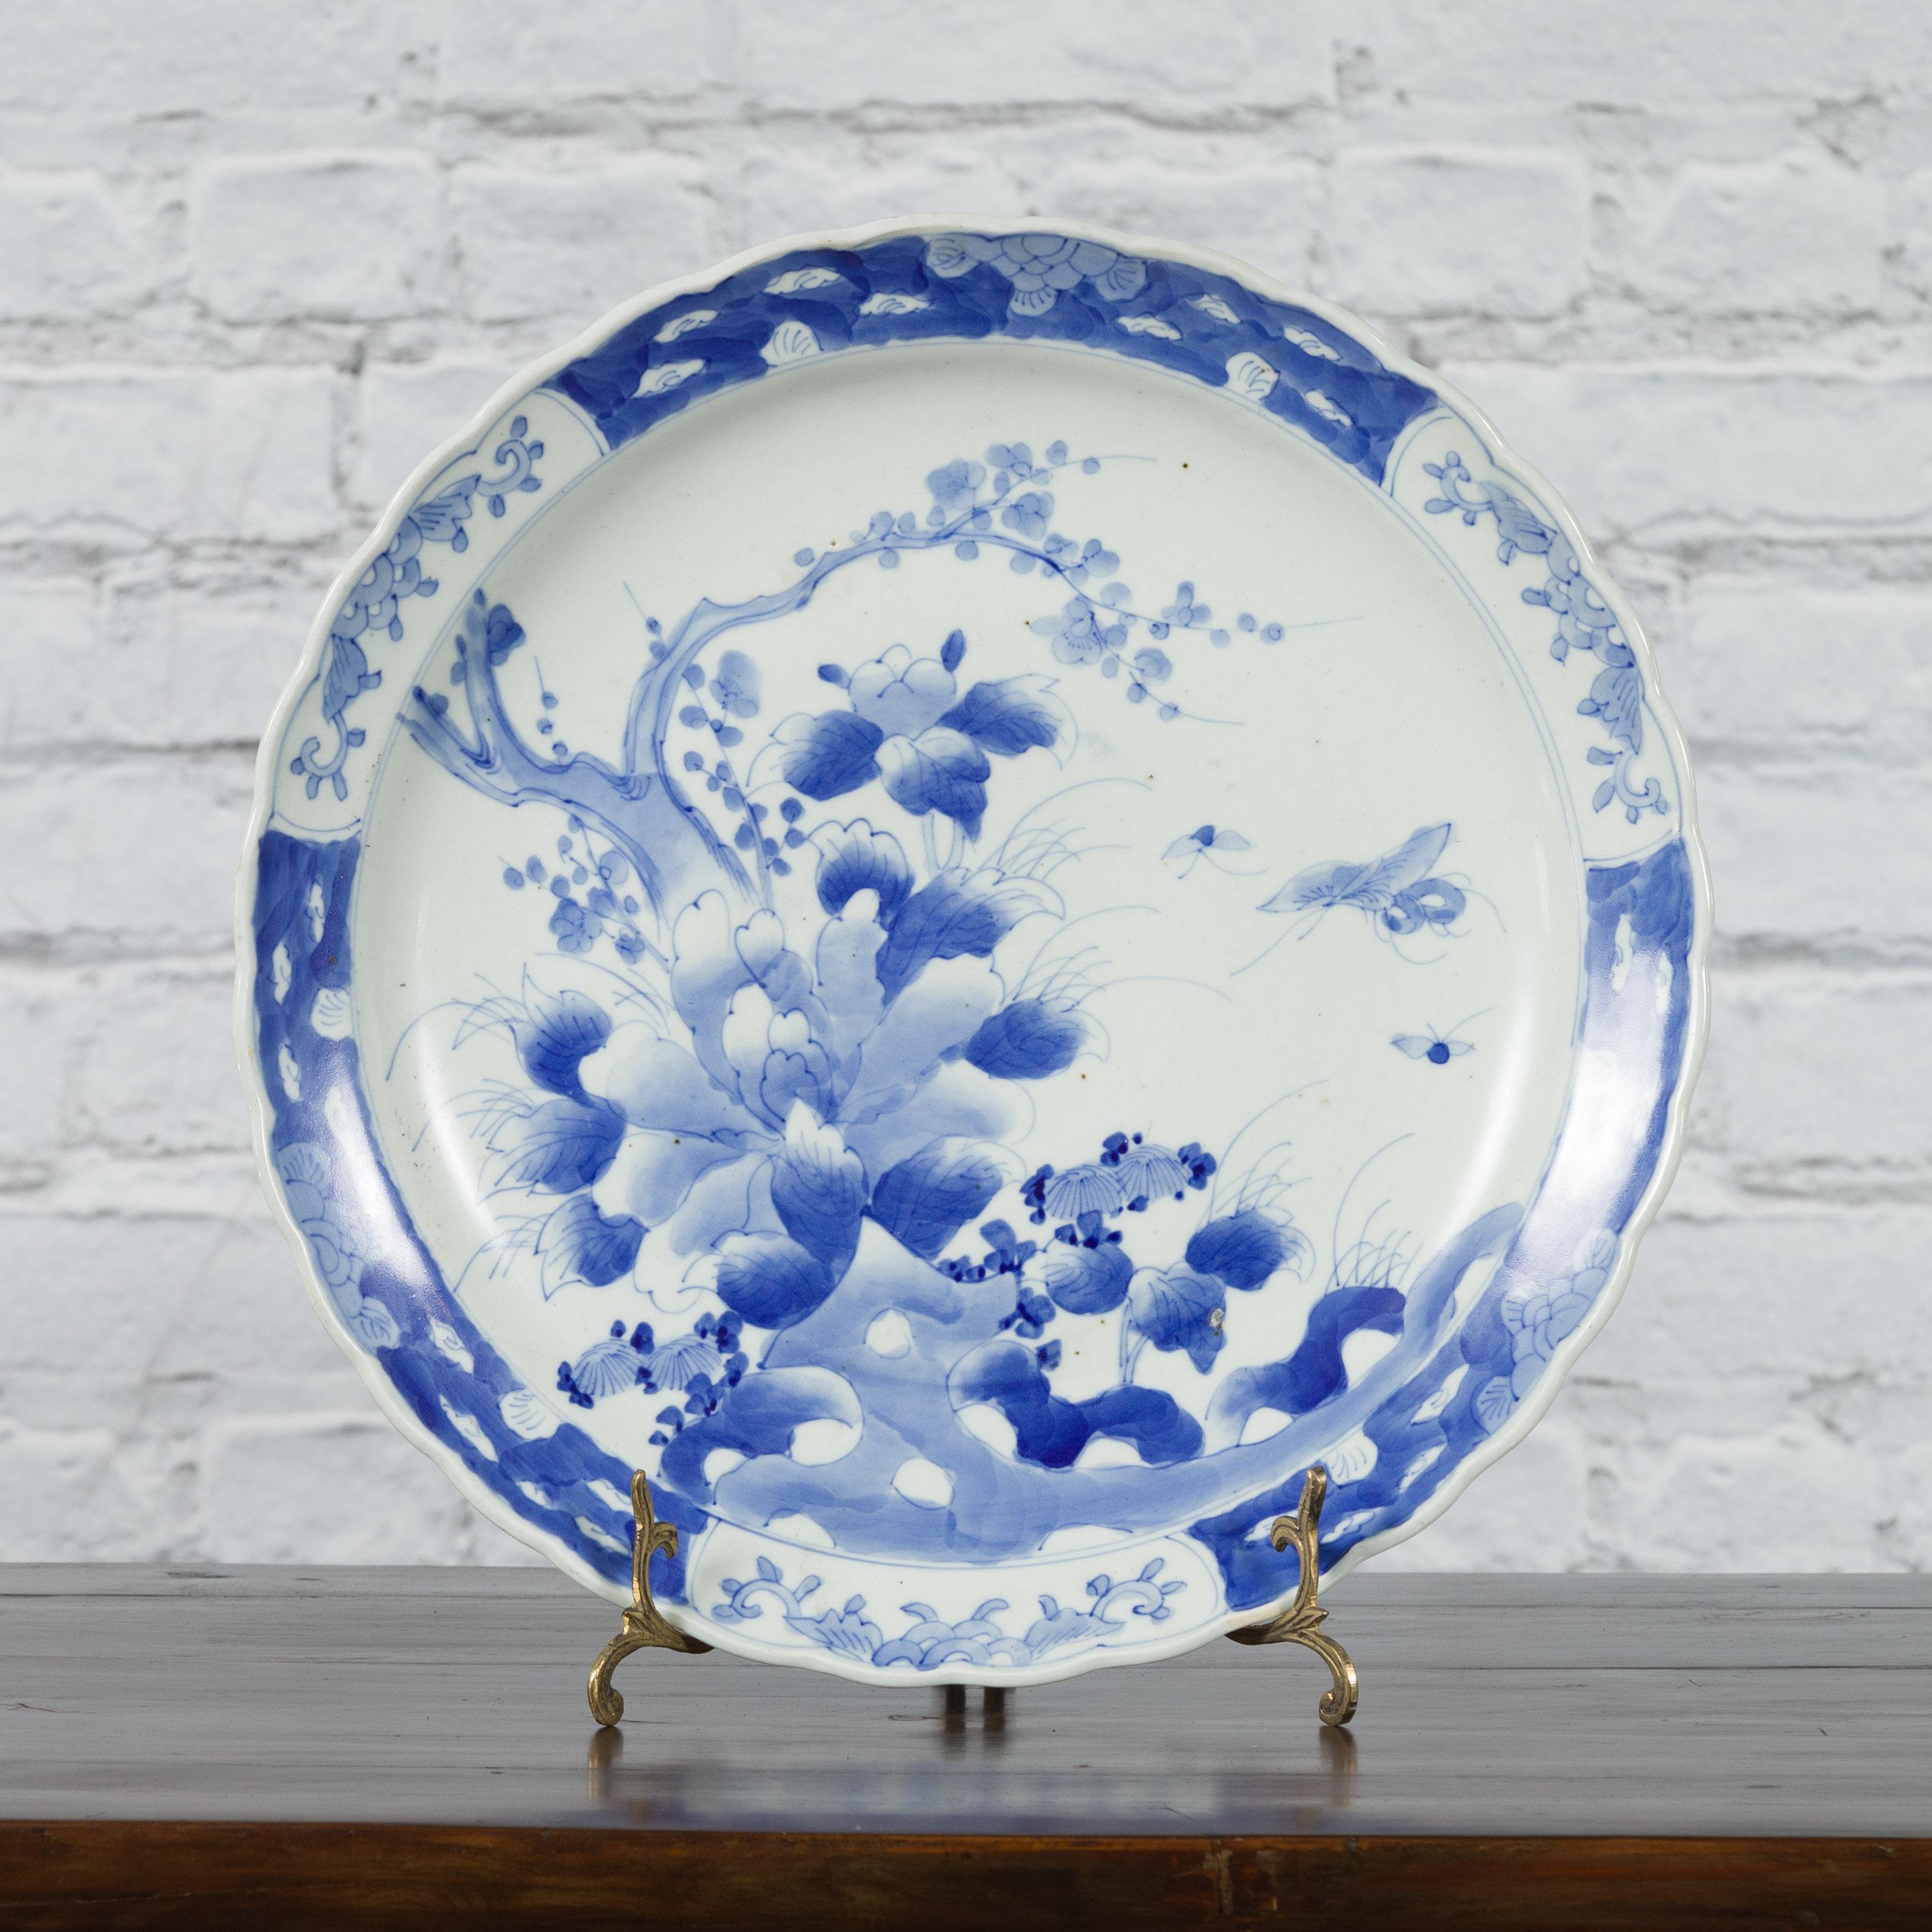 A Japanese Imari porcelain plate from the 19th century, with hand-painted blue and white tree, foliage and butterfly décor. Created in Japan during the 19th century, this Imari porcelain plate features a delicate blue and white décor depicting an